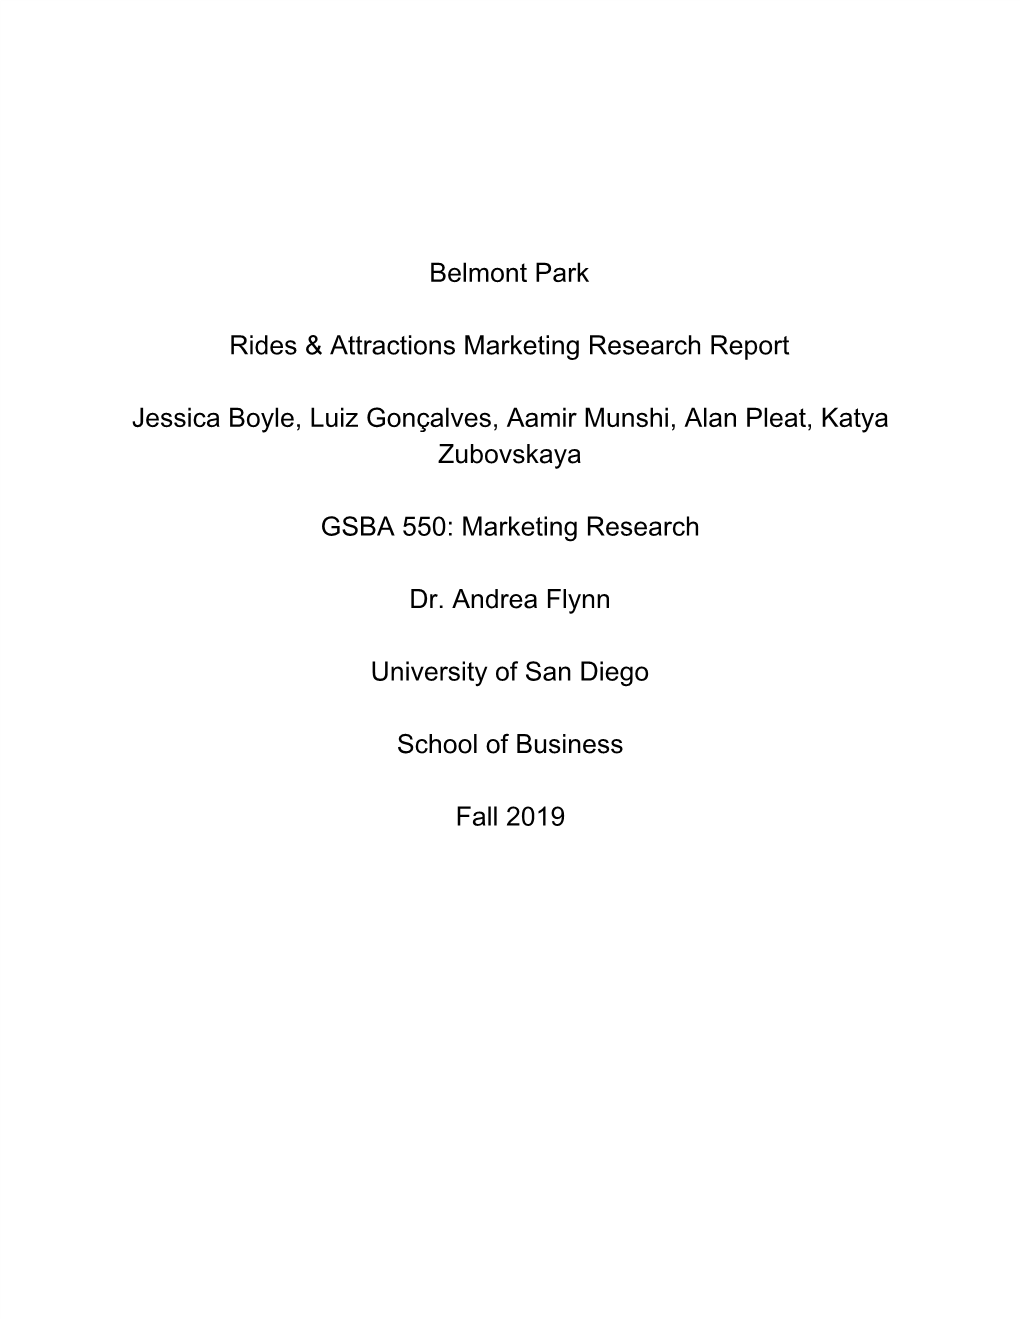 Belmont Park Rides & Attractions Marketing Research Report